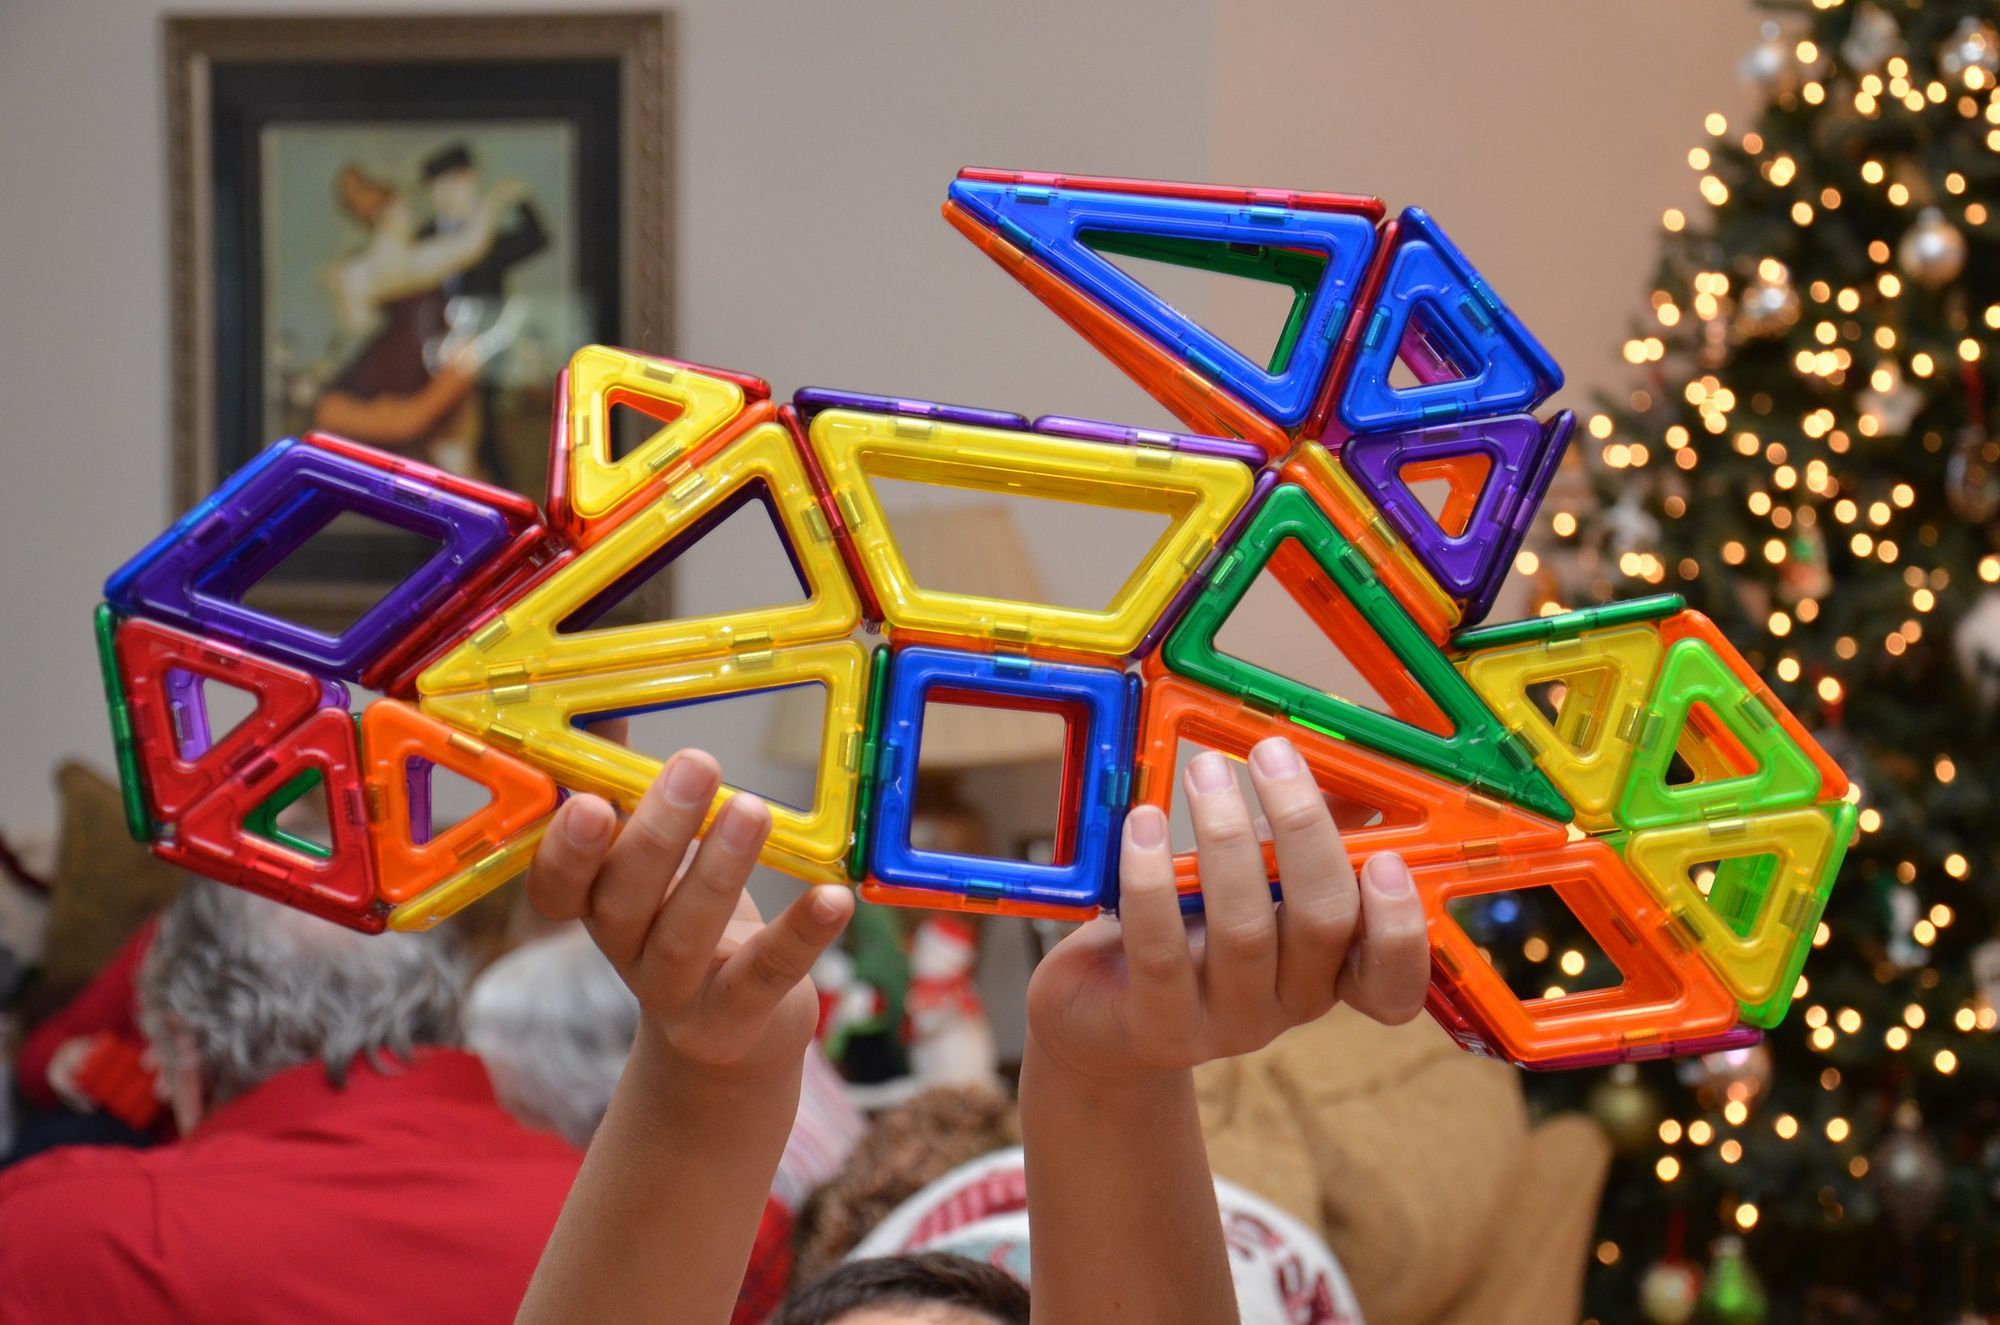 The Catch Block #86 - STEM-Adjacent Gifts for Kids!